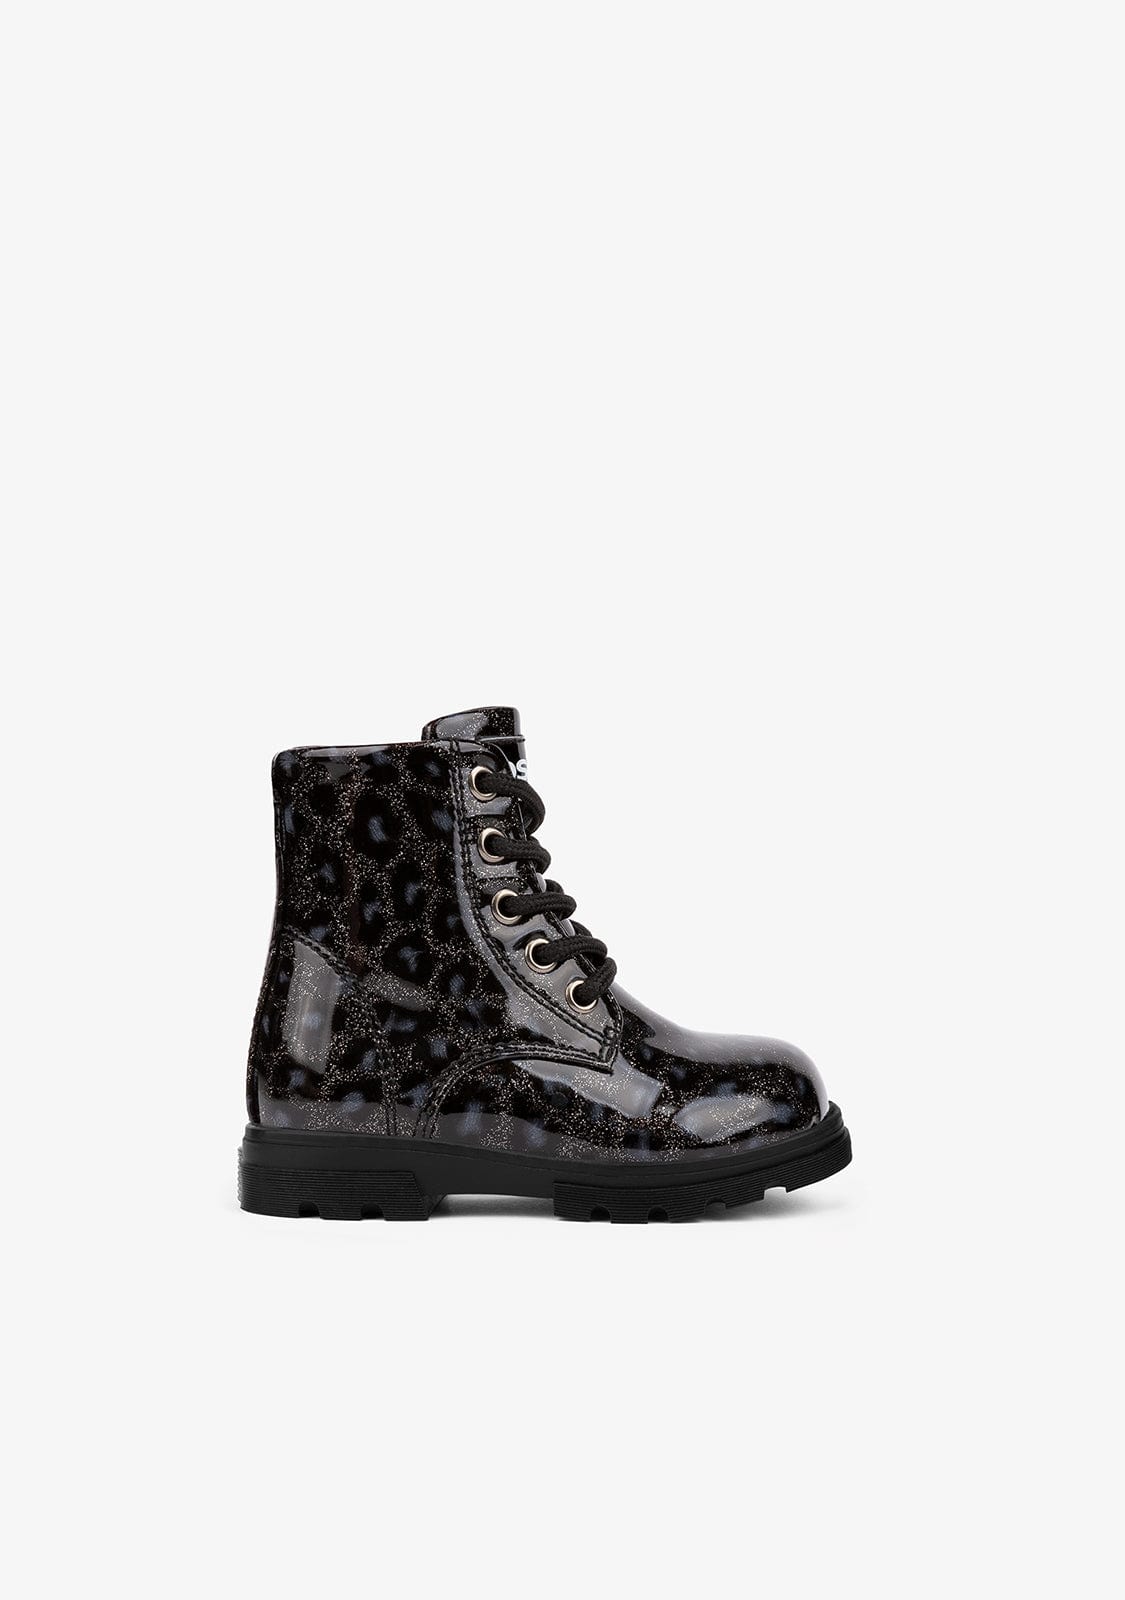 OSITO Shoes Baby's Lead Leopard Combat Boots